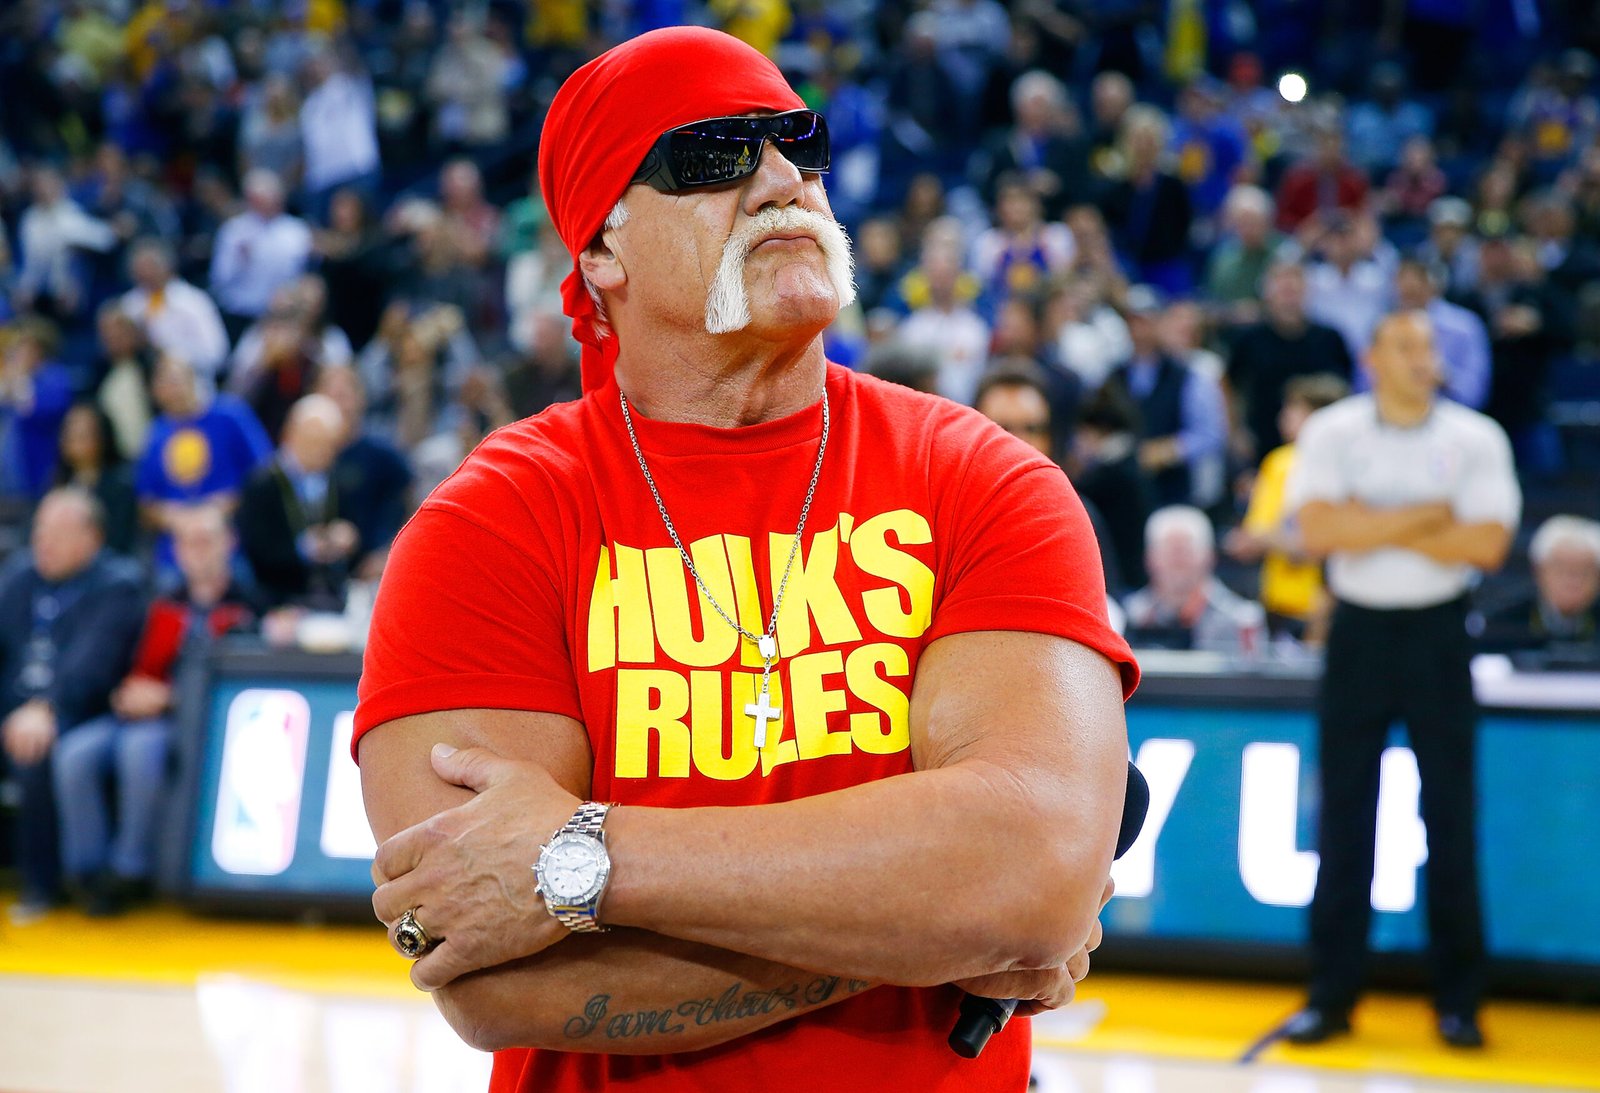 Is Hulk Hogan Related to Roman Reigns?